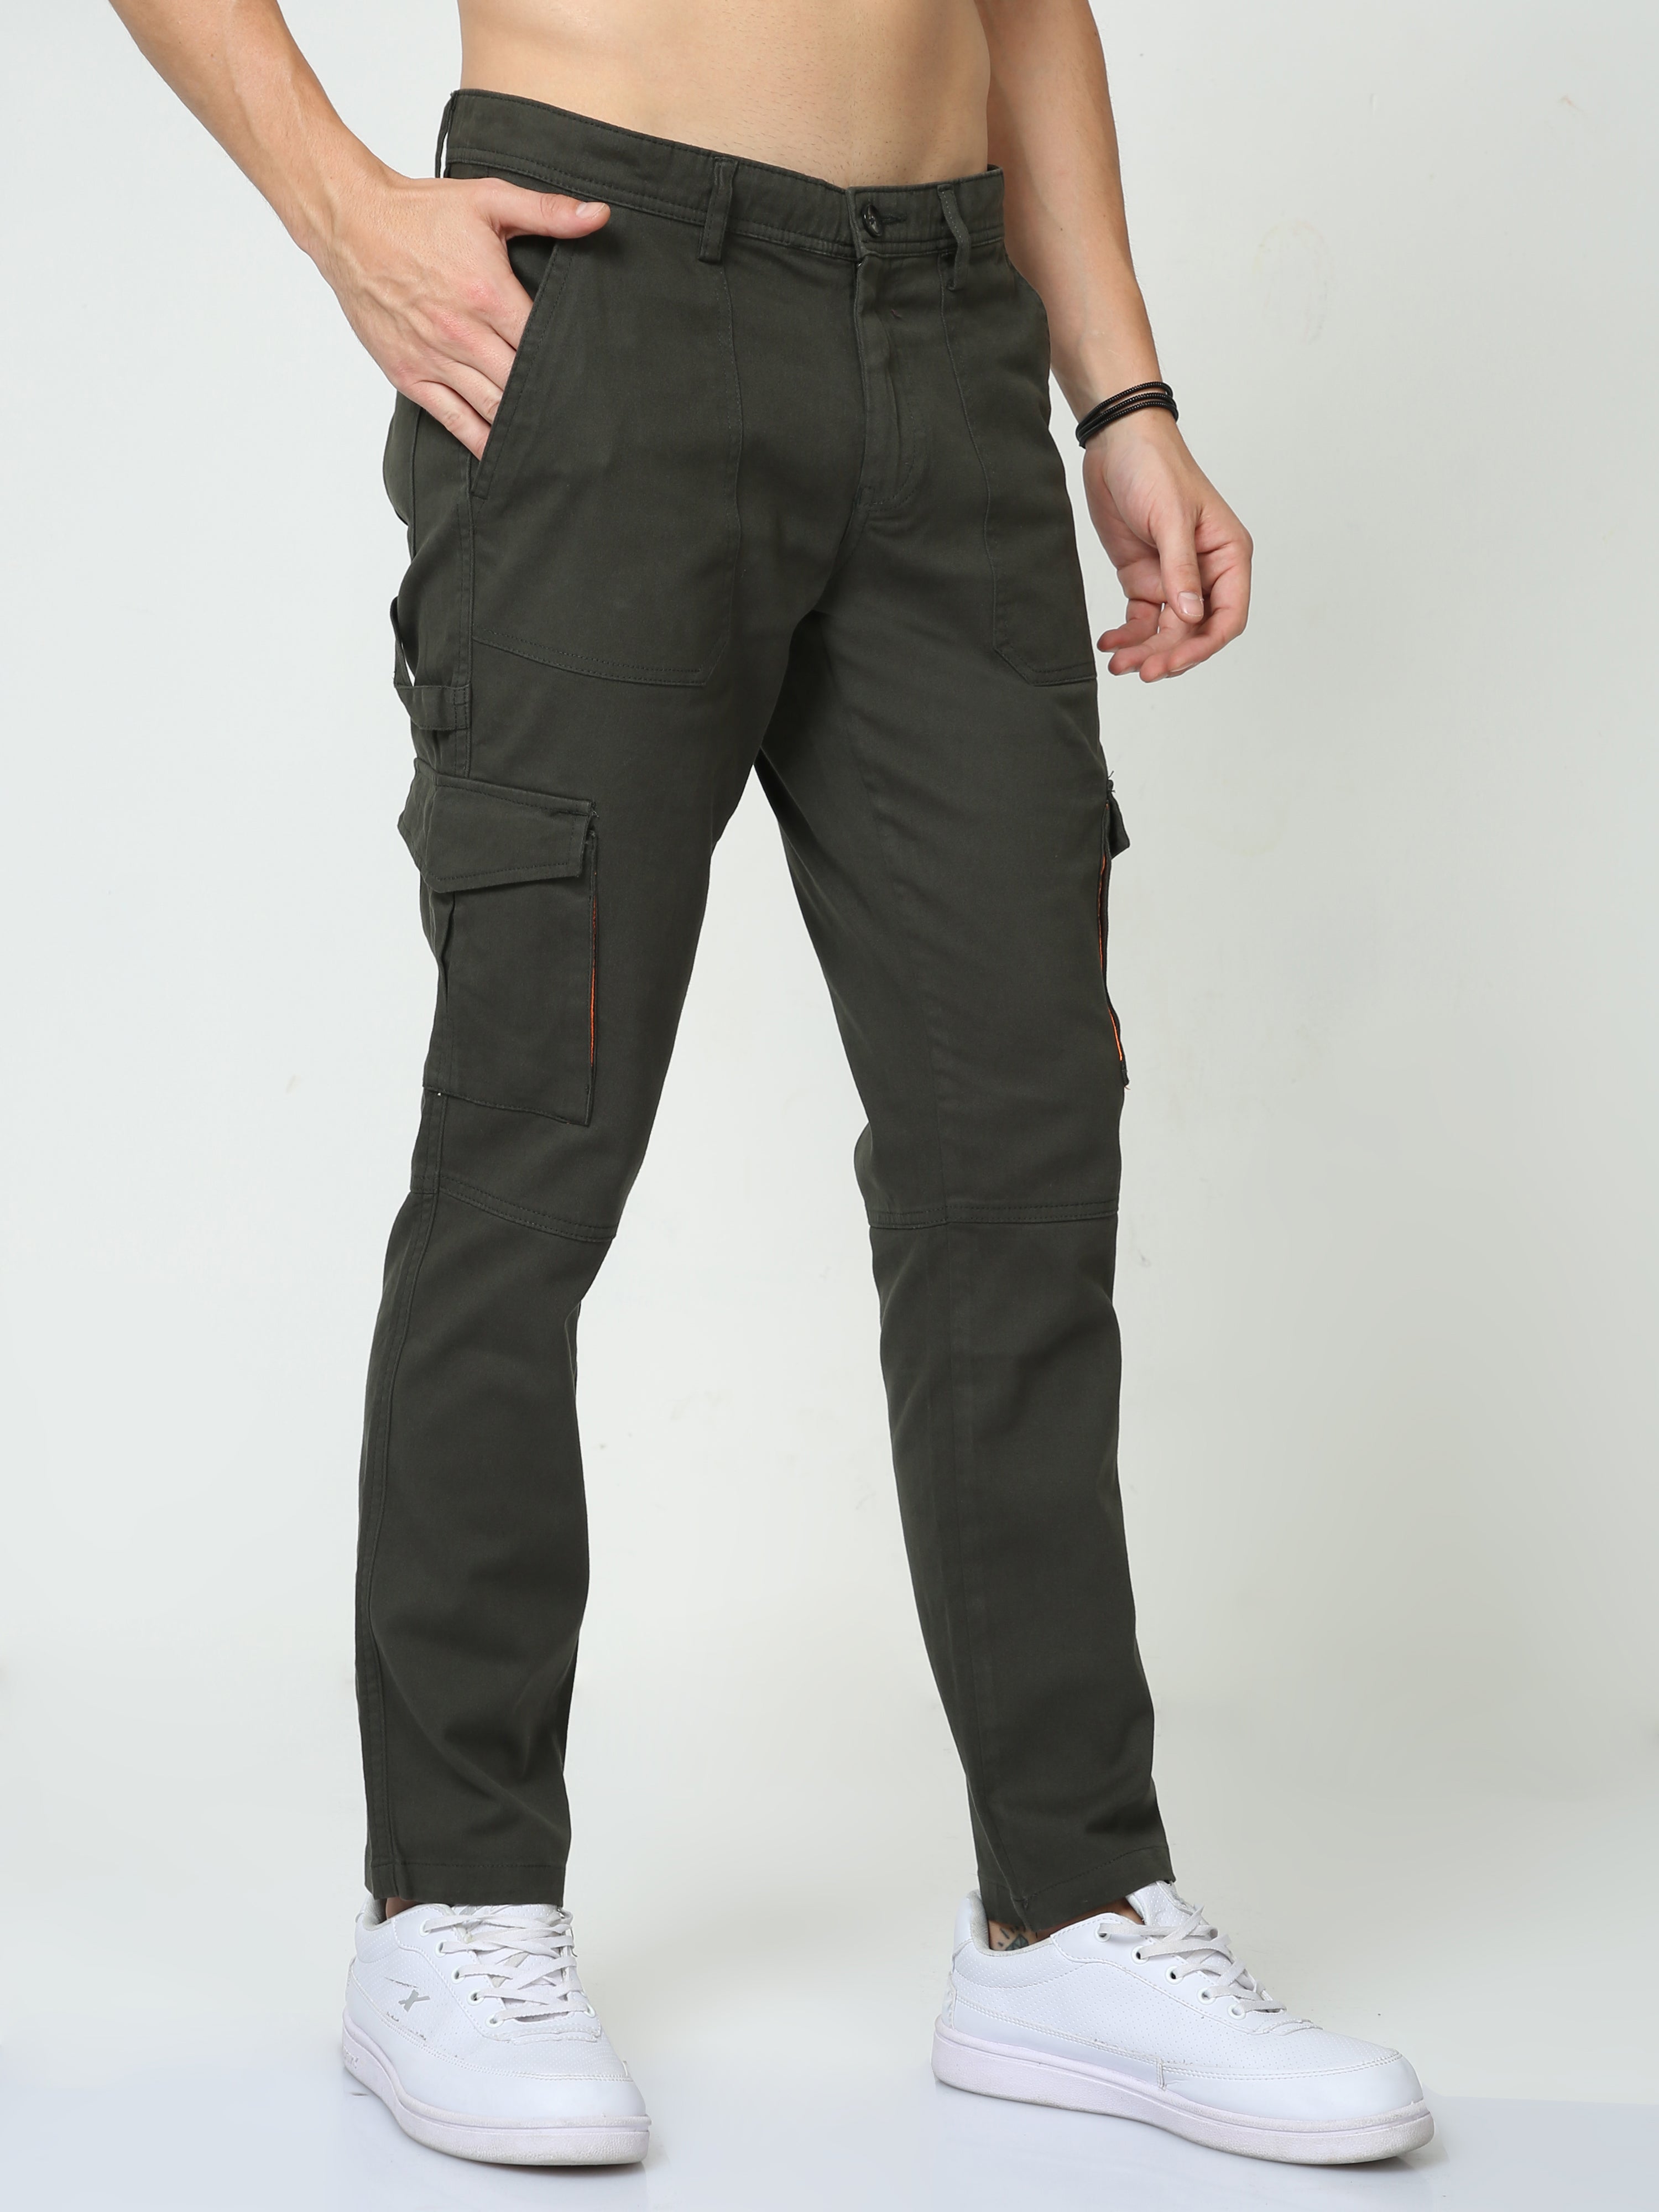 Buy Olive Trousers & Pants for Men by SIN Online | Ajio.com